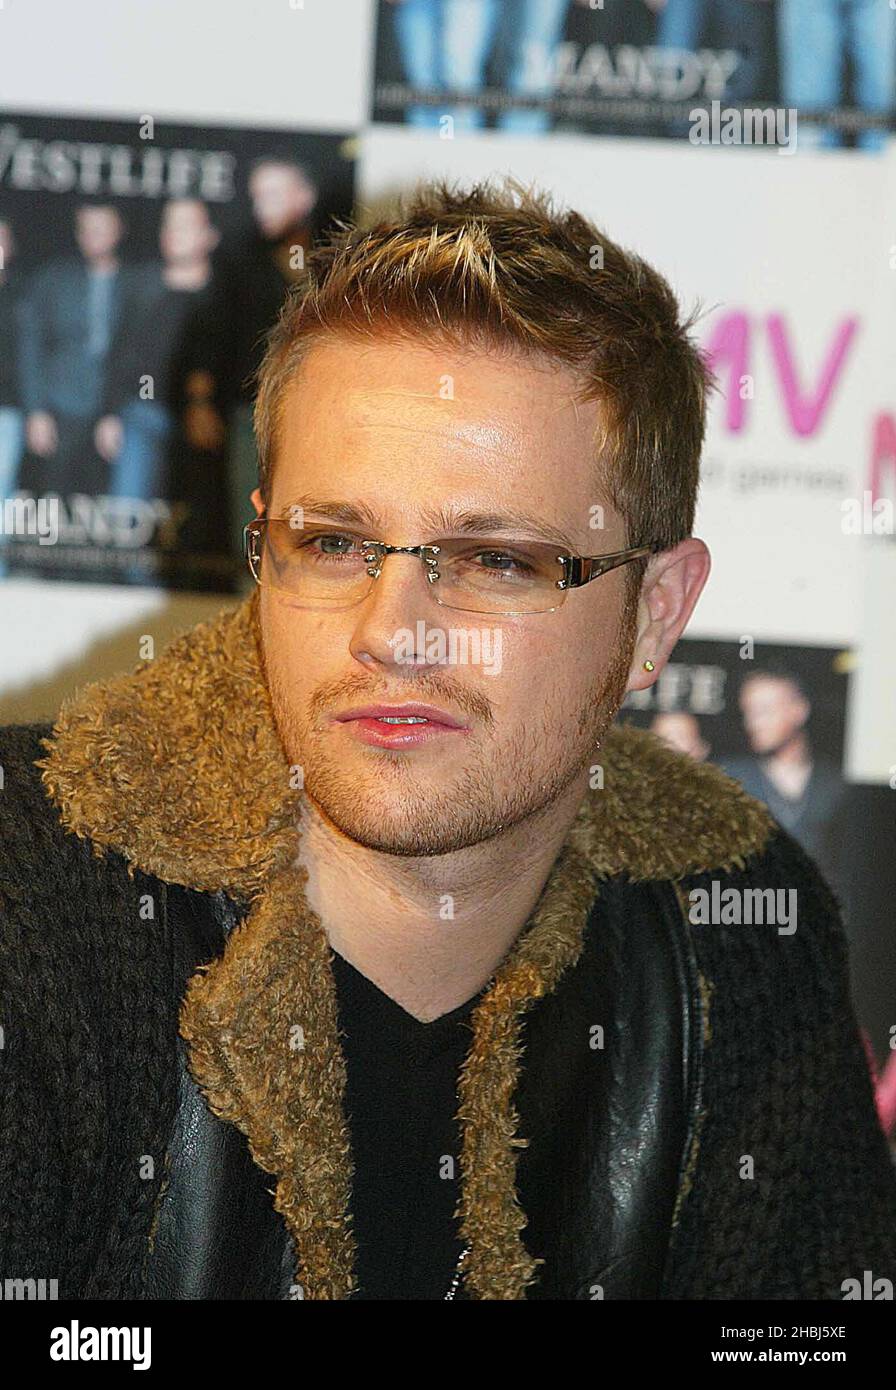 Nicky from Westlife promotes the group's new single Mandy at the HMV Trocadero, Piccadilly Circus in London. Stock Photo